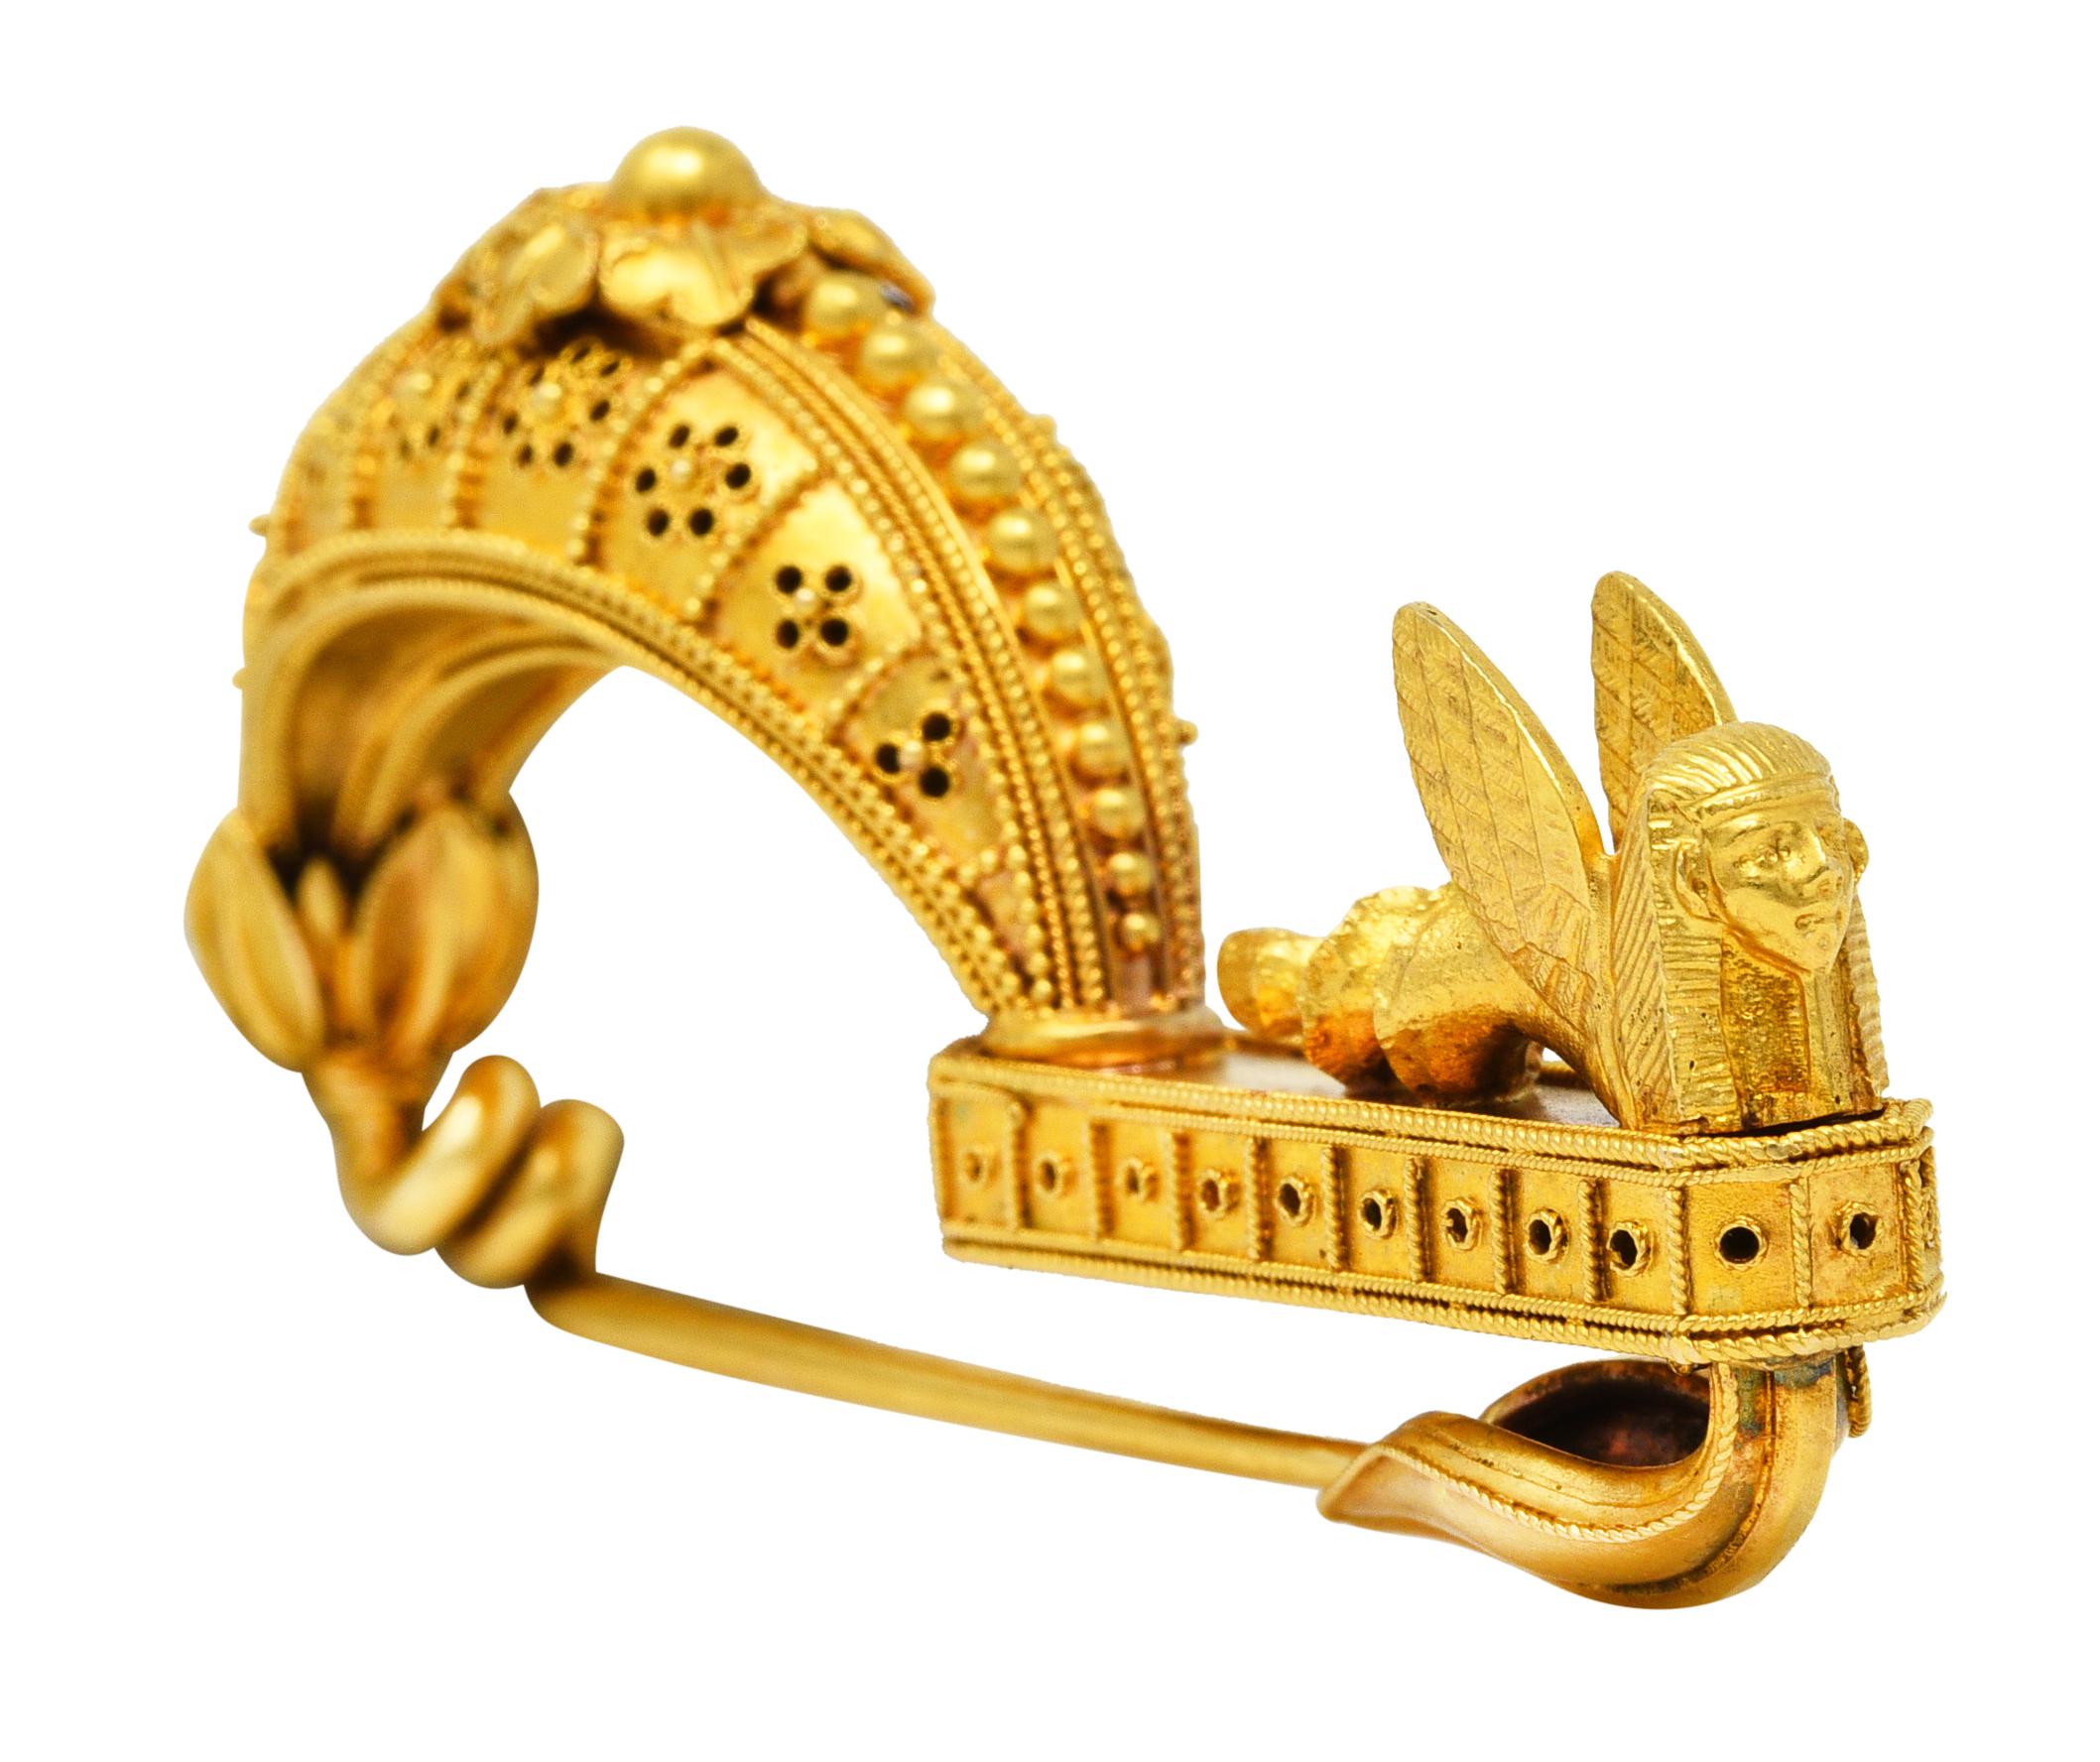 Brooch is designed as a crescent form arching to connect to an elongated octagonal platform. Crescent is decorated with granulation, filigree, pierced floral motifs and rendered foliates. Octagonal platform features decorative piercing and filigree